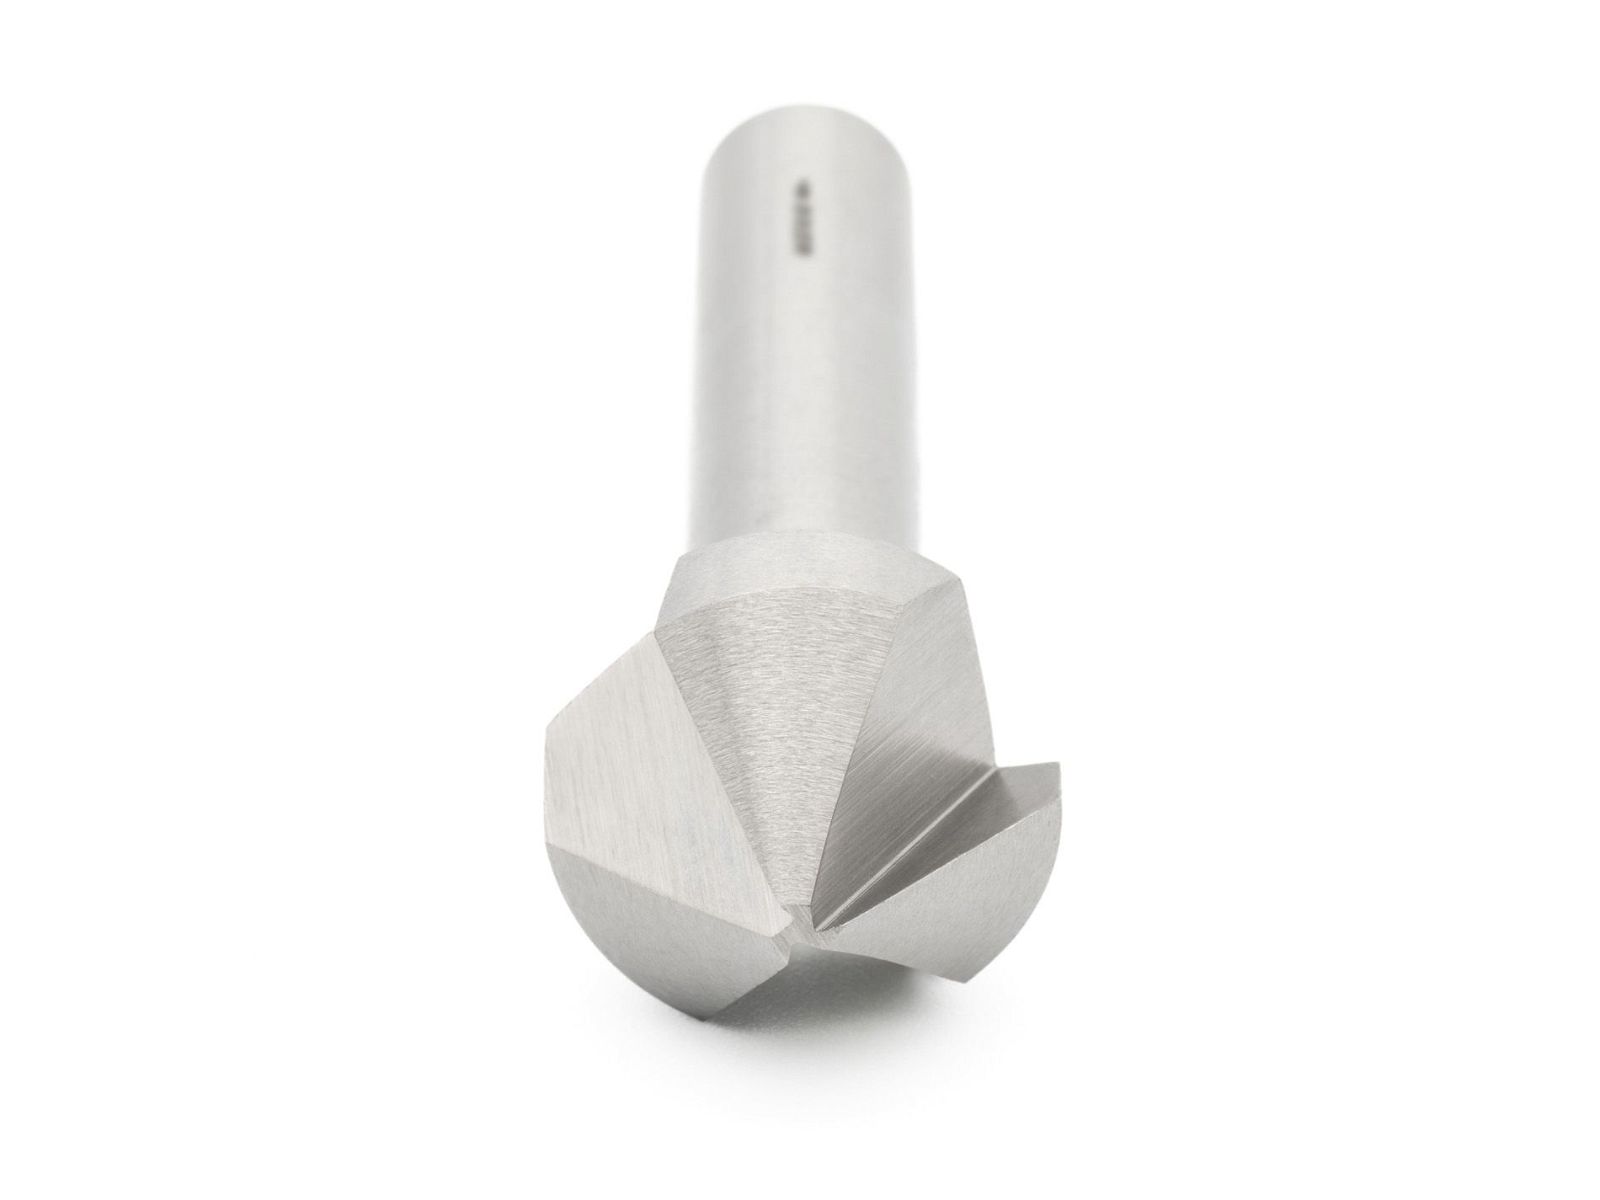 HSSG 90° Countersink 20.5 mm (for M 10)